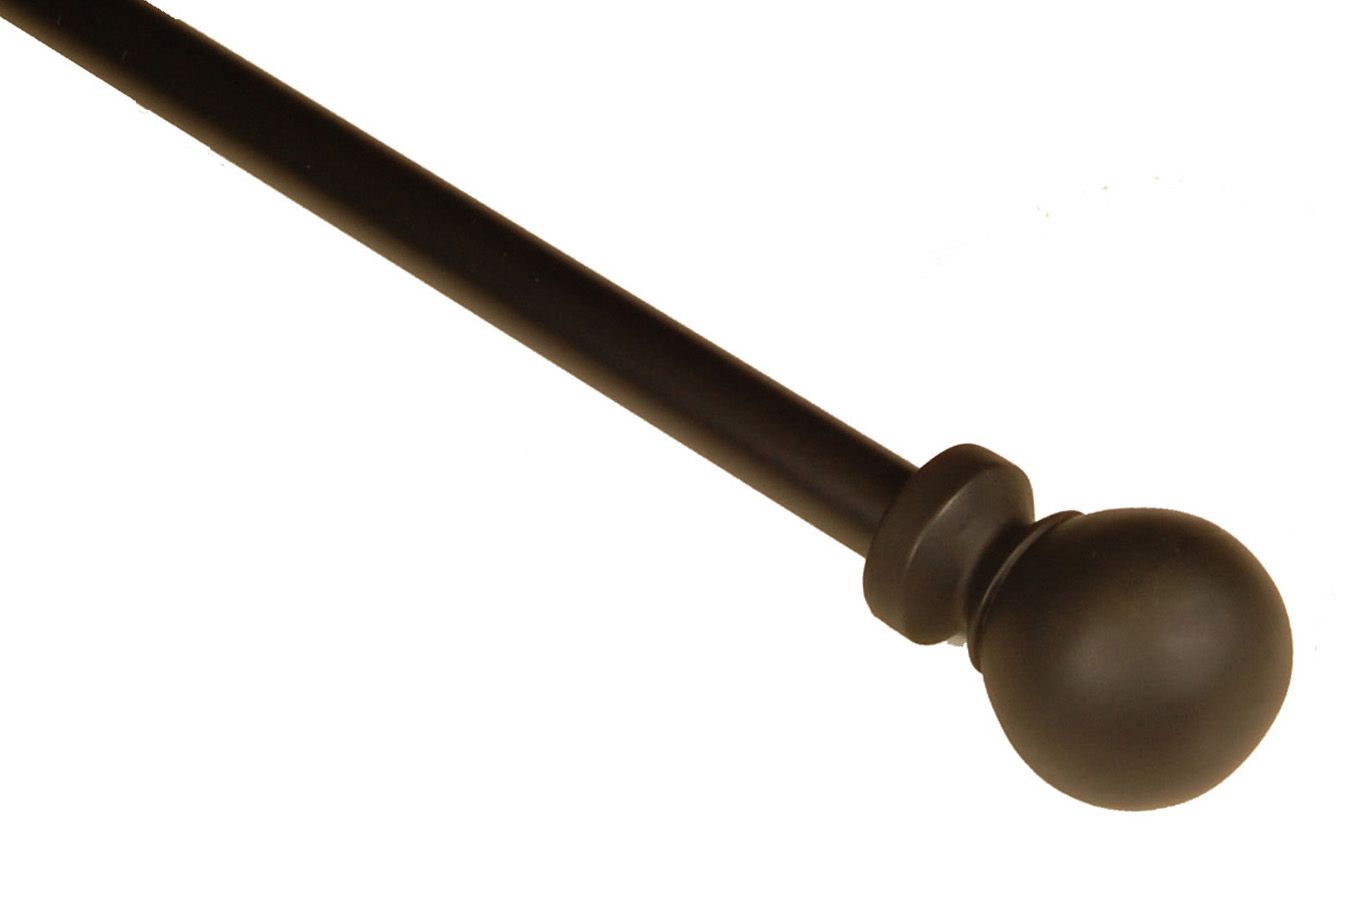 BCL Classic Ball Curtain Rod, Black Finish, 86-inch to 120-inch